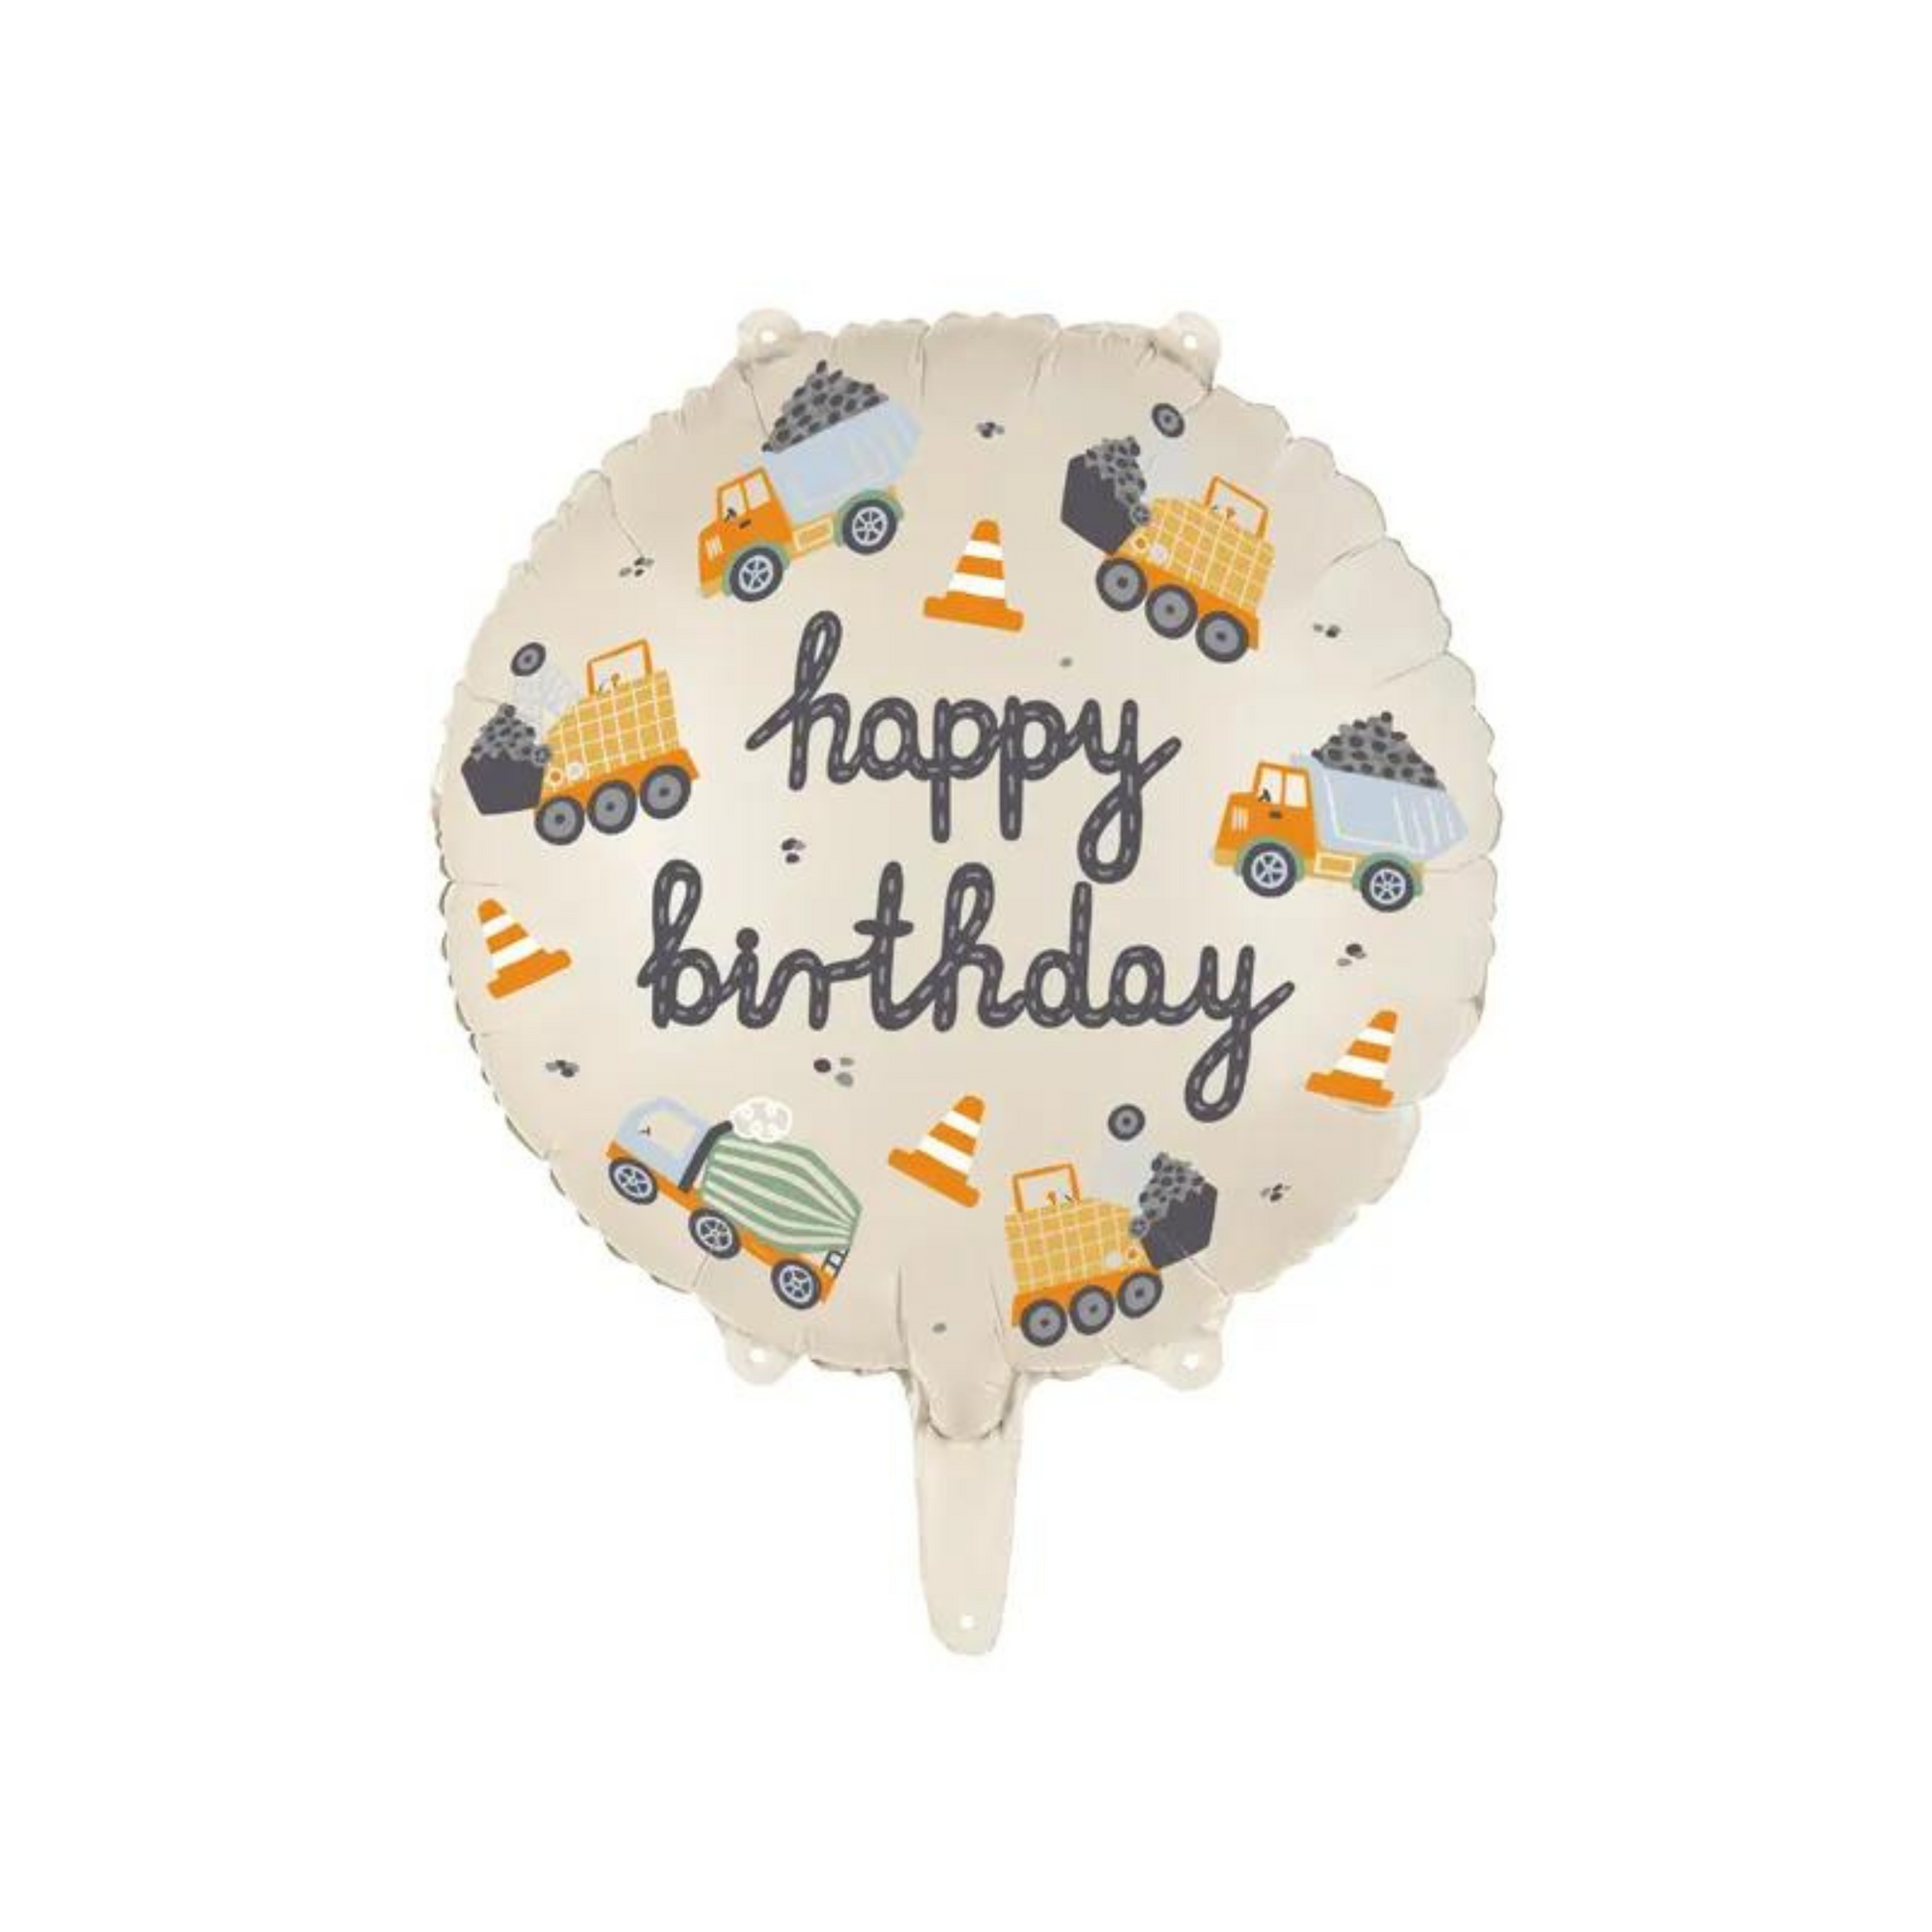 round foil balloon with construction truck images and happy birthday message